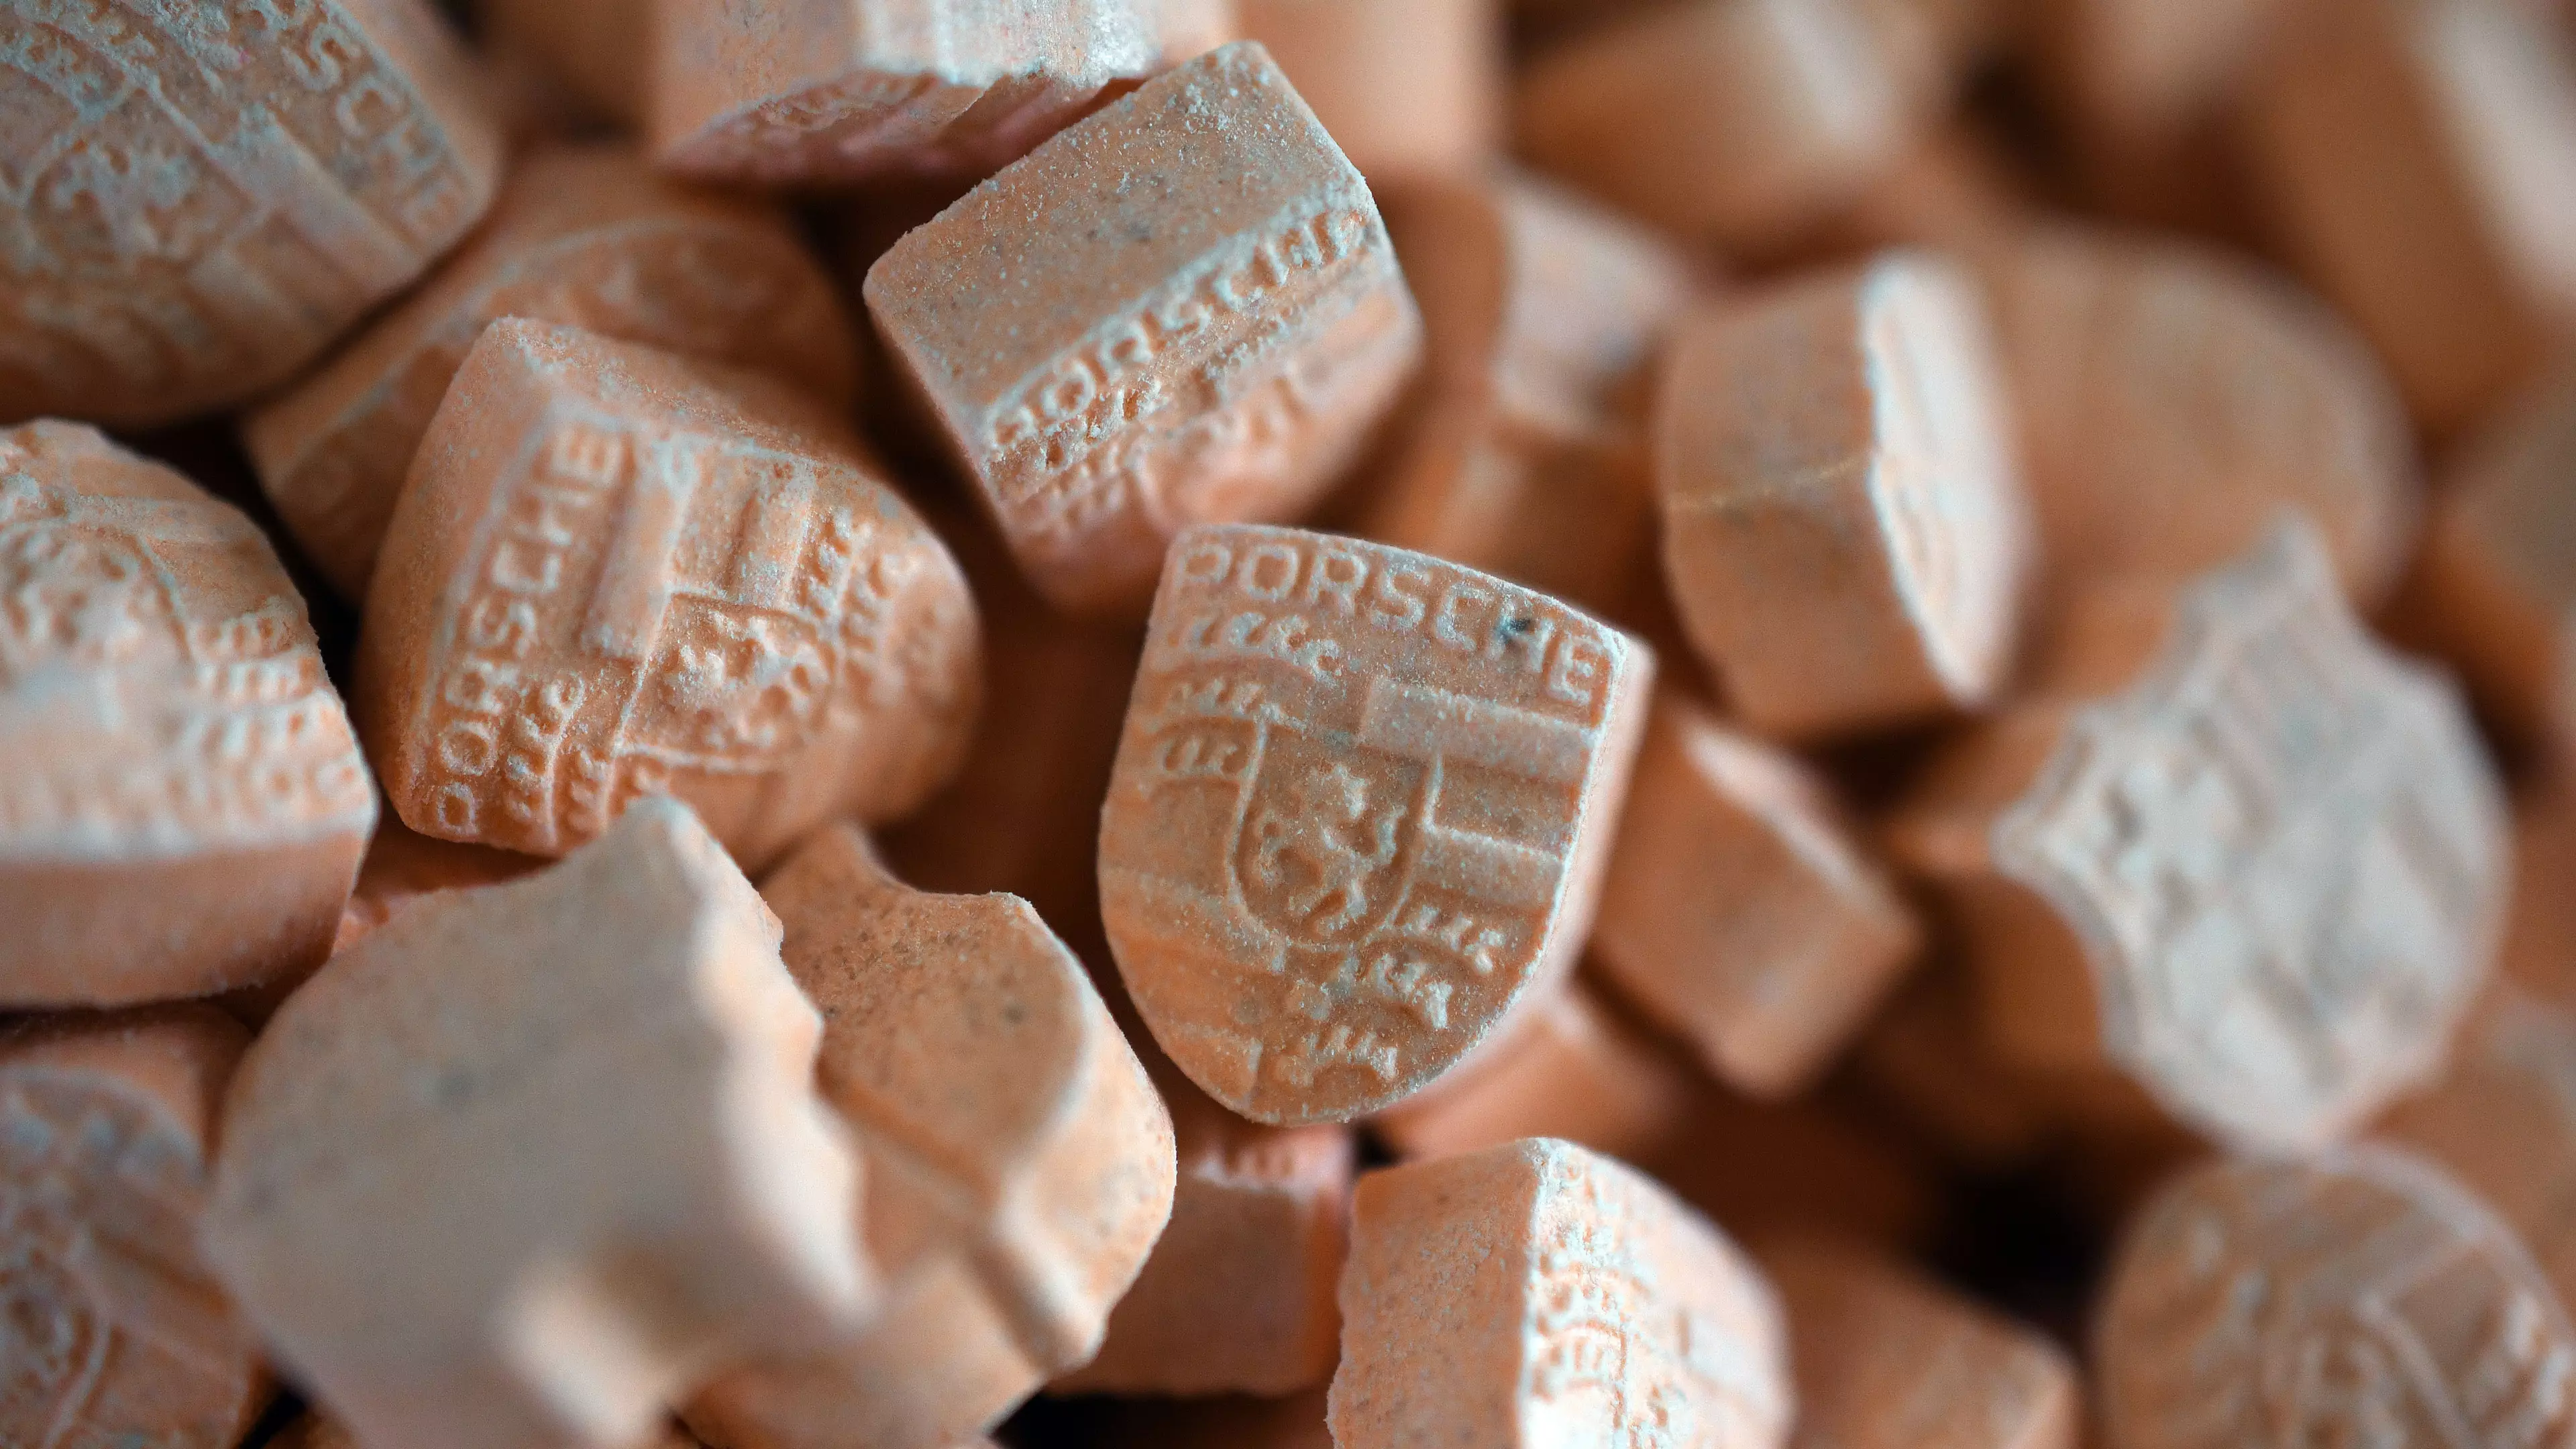 New Form Of MDMA Taken At 'Super Parties' Is Giving Students Four-Day Comedowns